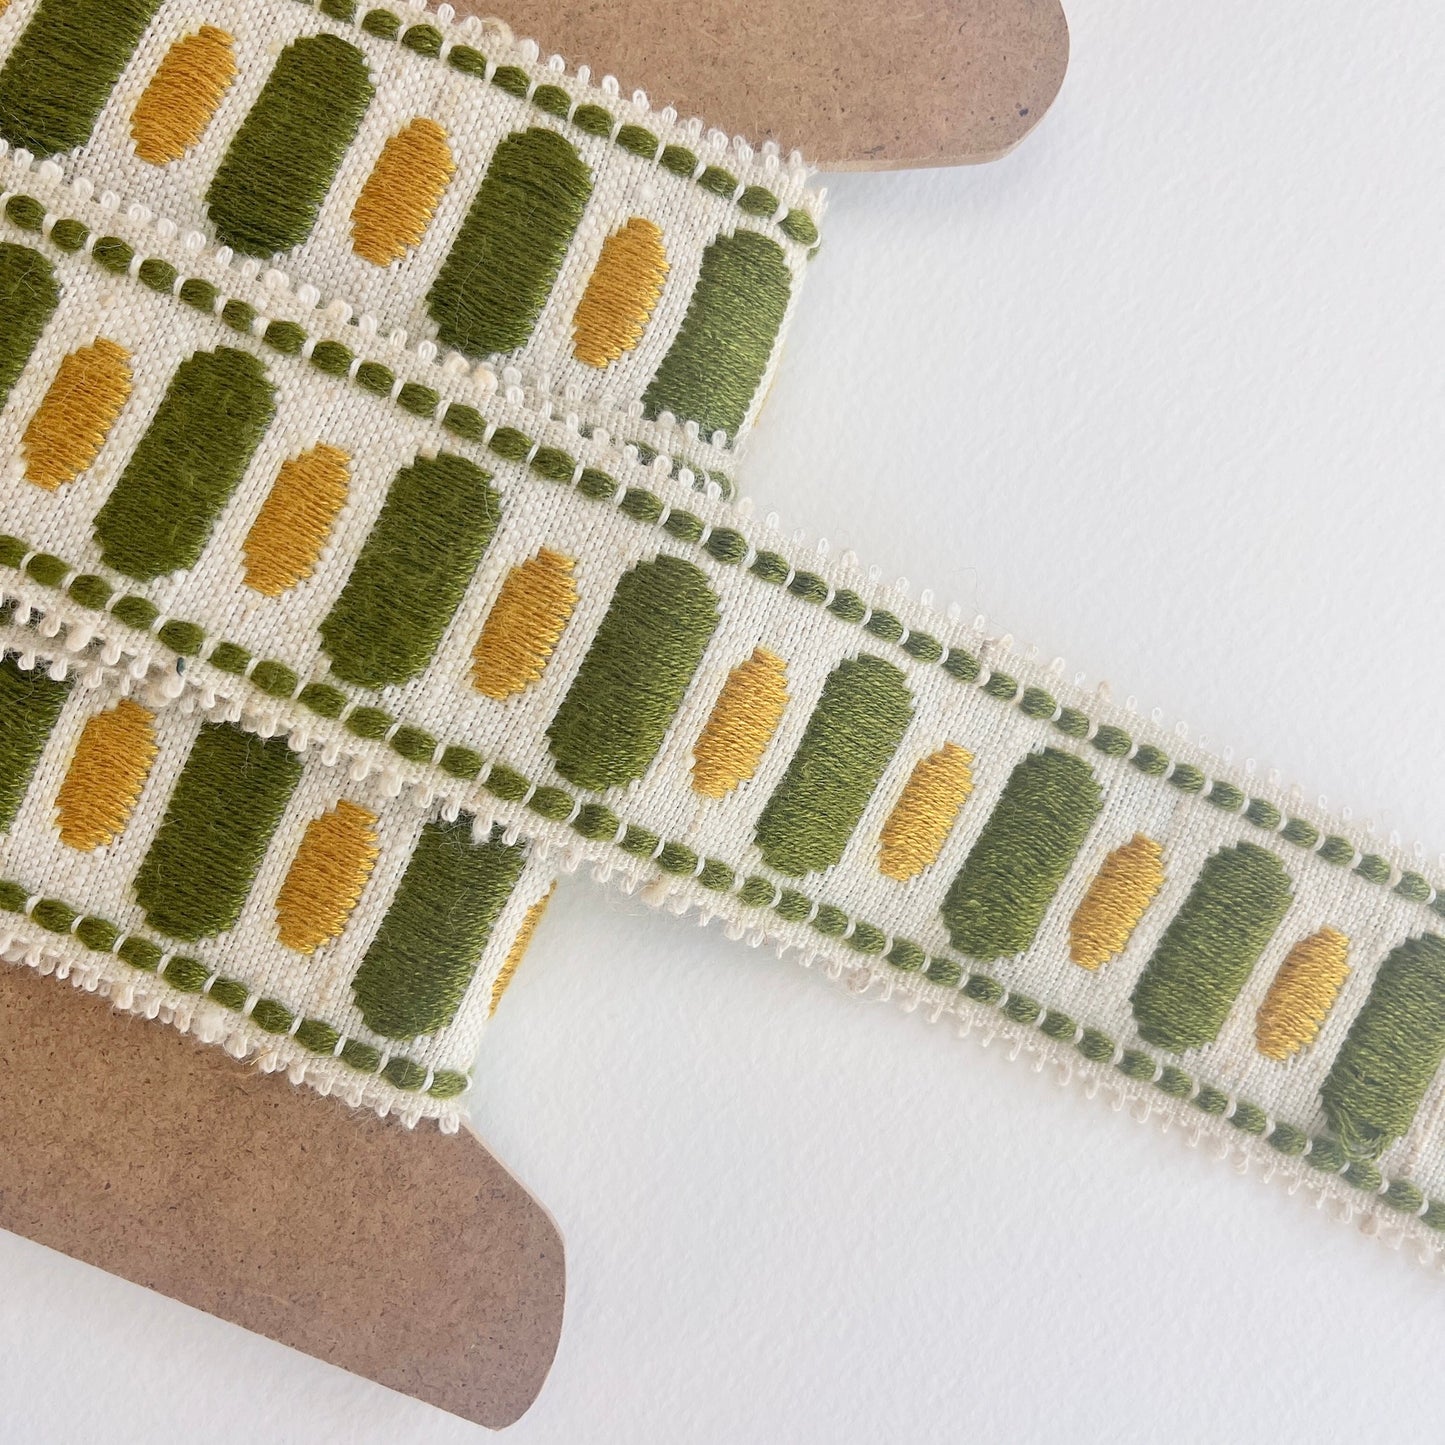 olive and mustard Vintage, retro upholstery trim in made by Dralon - Bayer Fibre textile, manufactured in the 1970s.